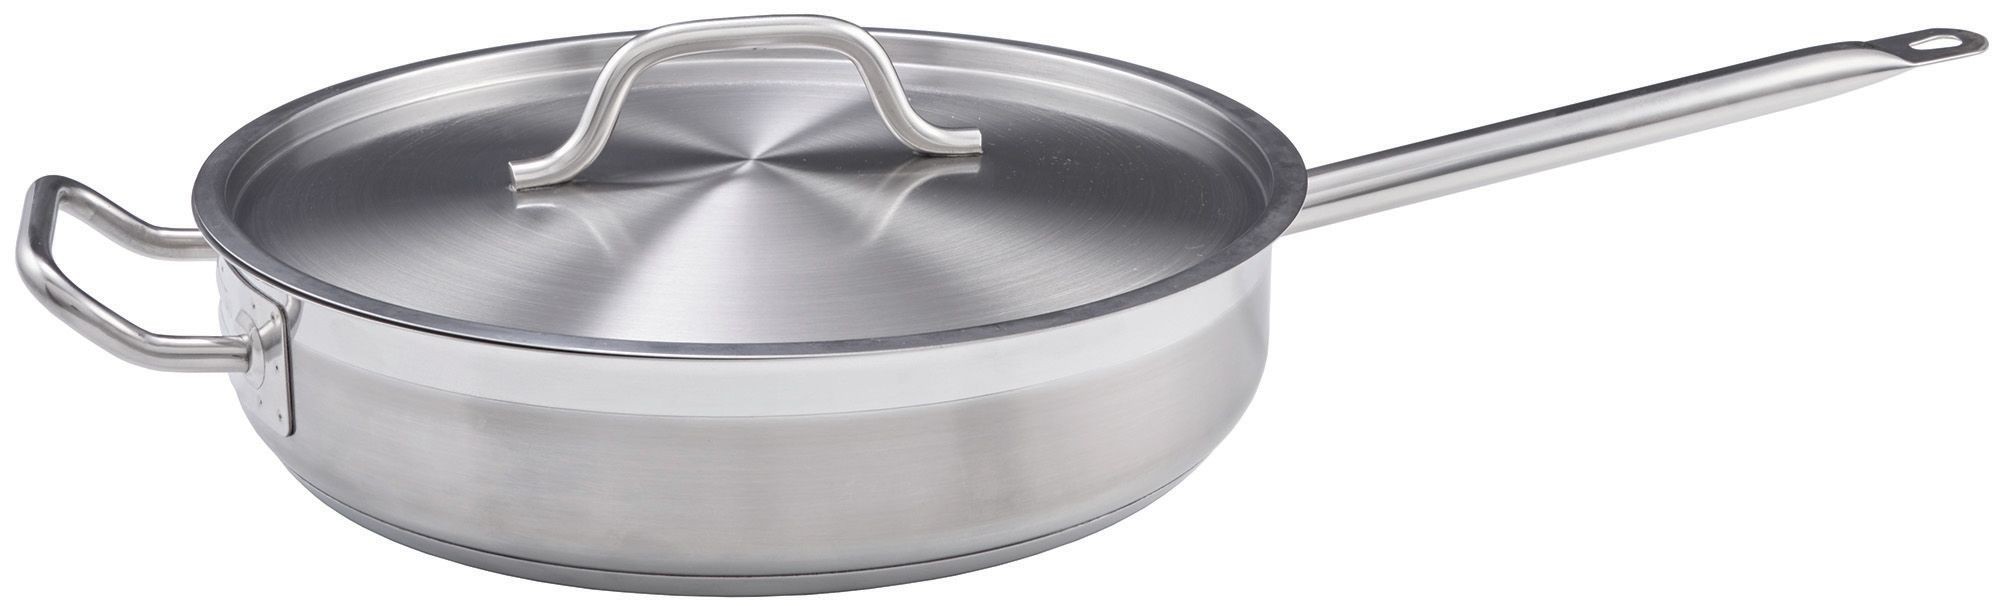 Winco SSET-5 Stainless Steel 5 Qt. Saute´ Pan with Cover